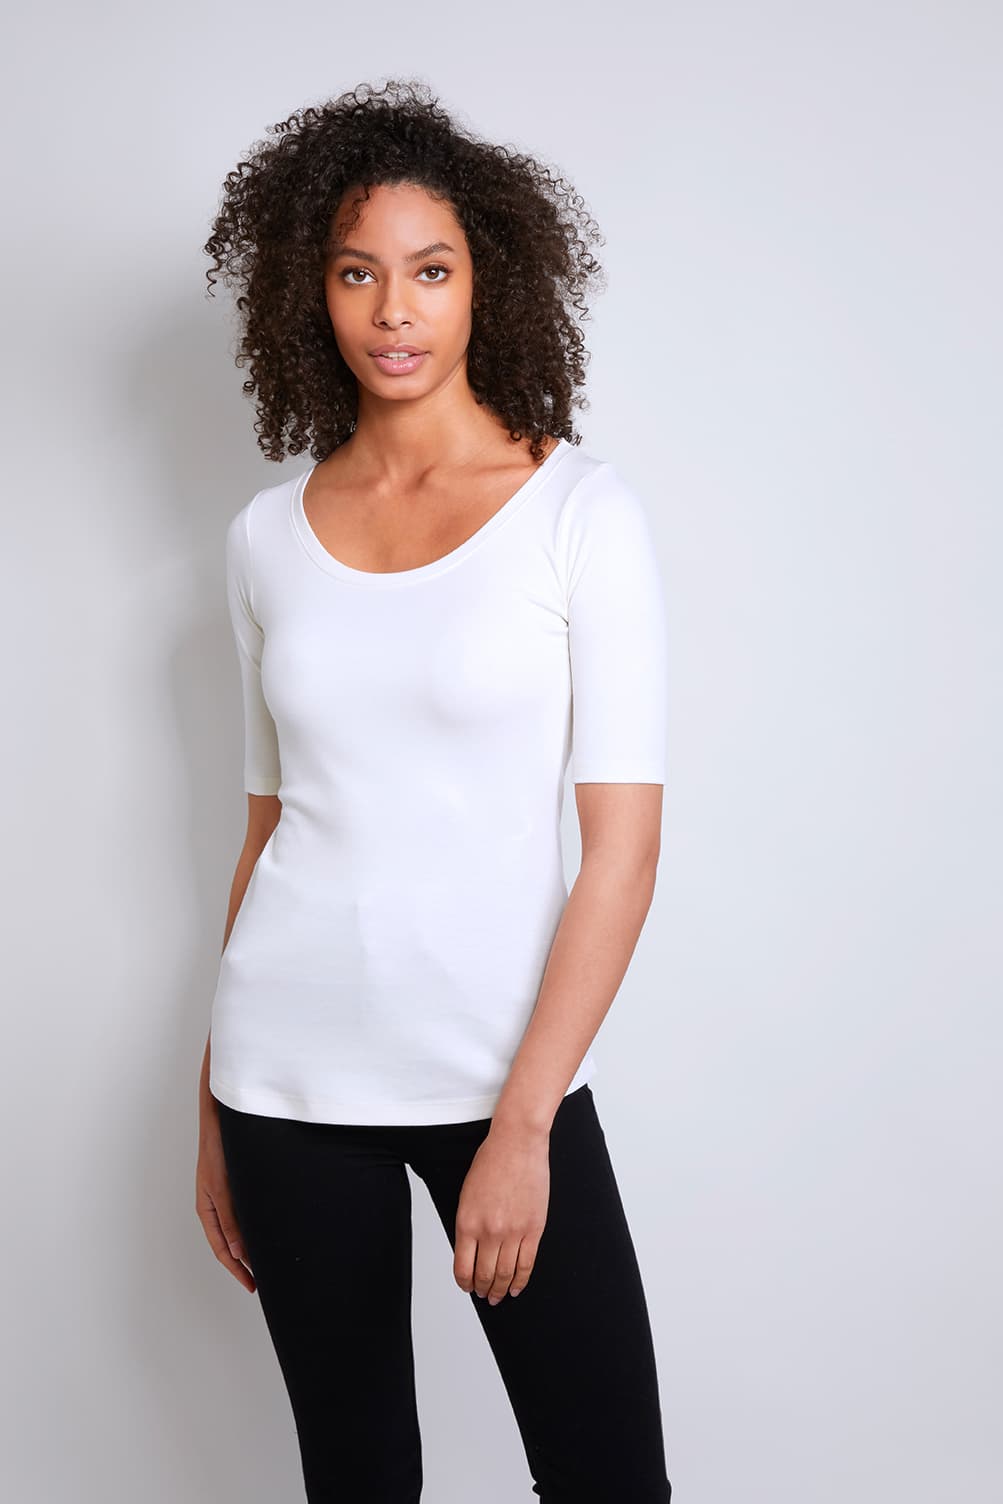 Women's Mid-Weight Flattering cream Half Sleeve Scoop Neck T-Shirt - Quality Half Sleeve Scoop - Classic T-shirt Silhouette by Lavender Hill Clothing